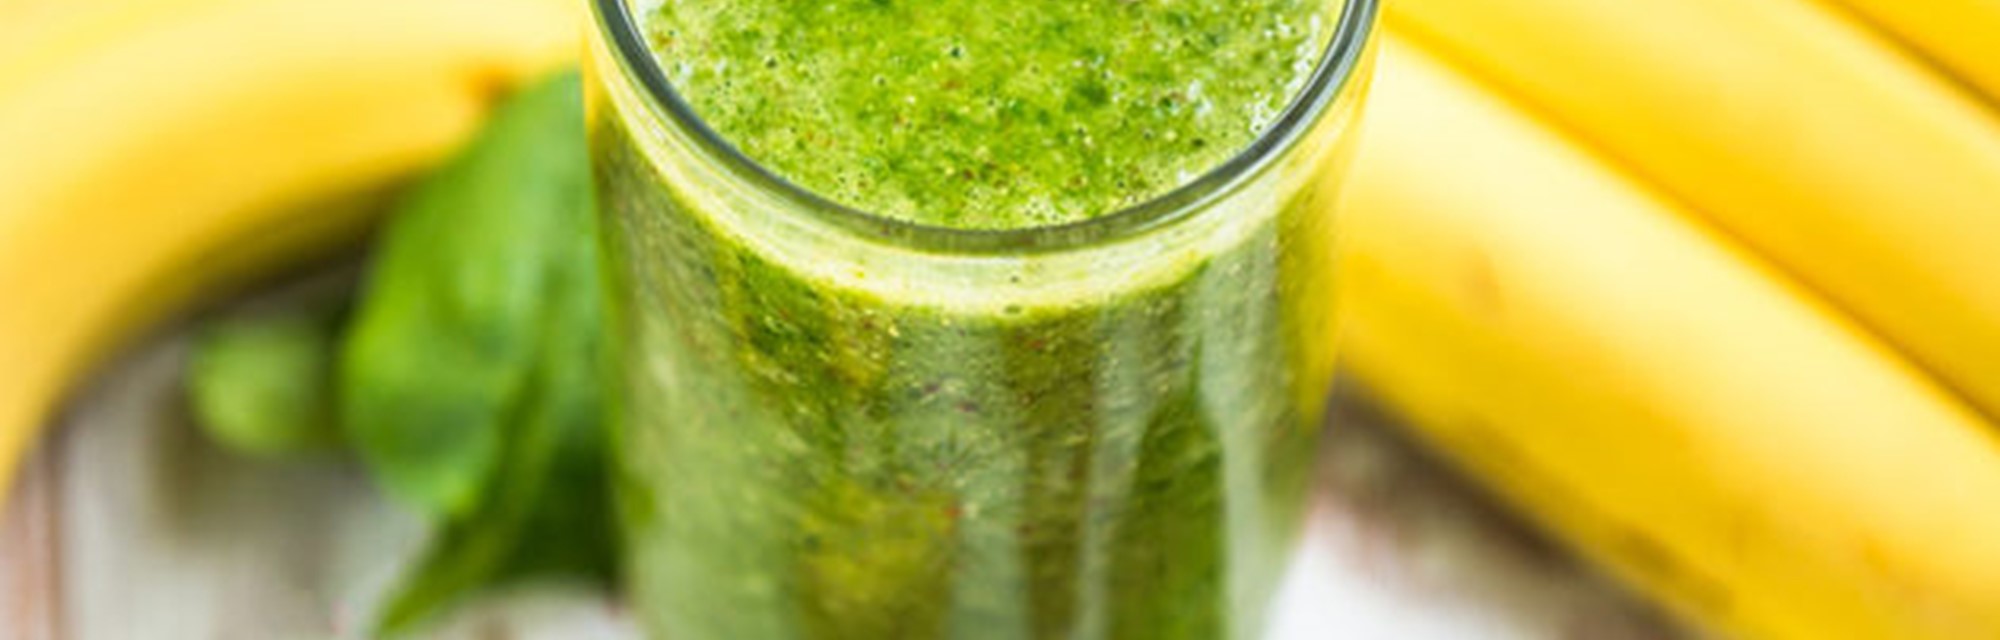 Groovy green smoothie